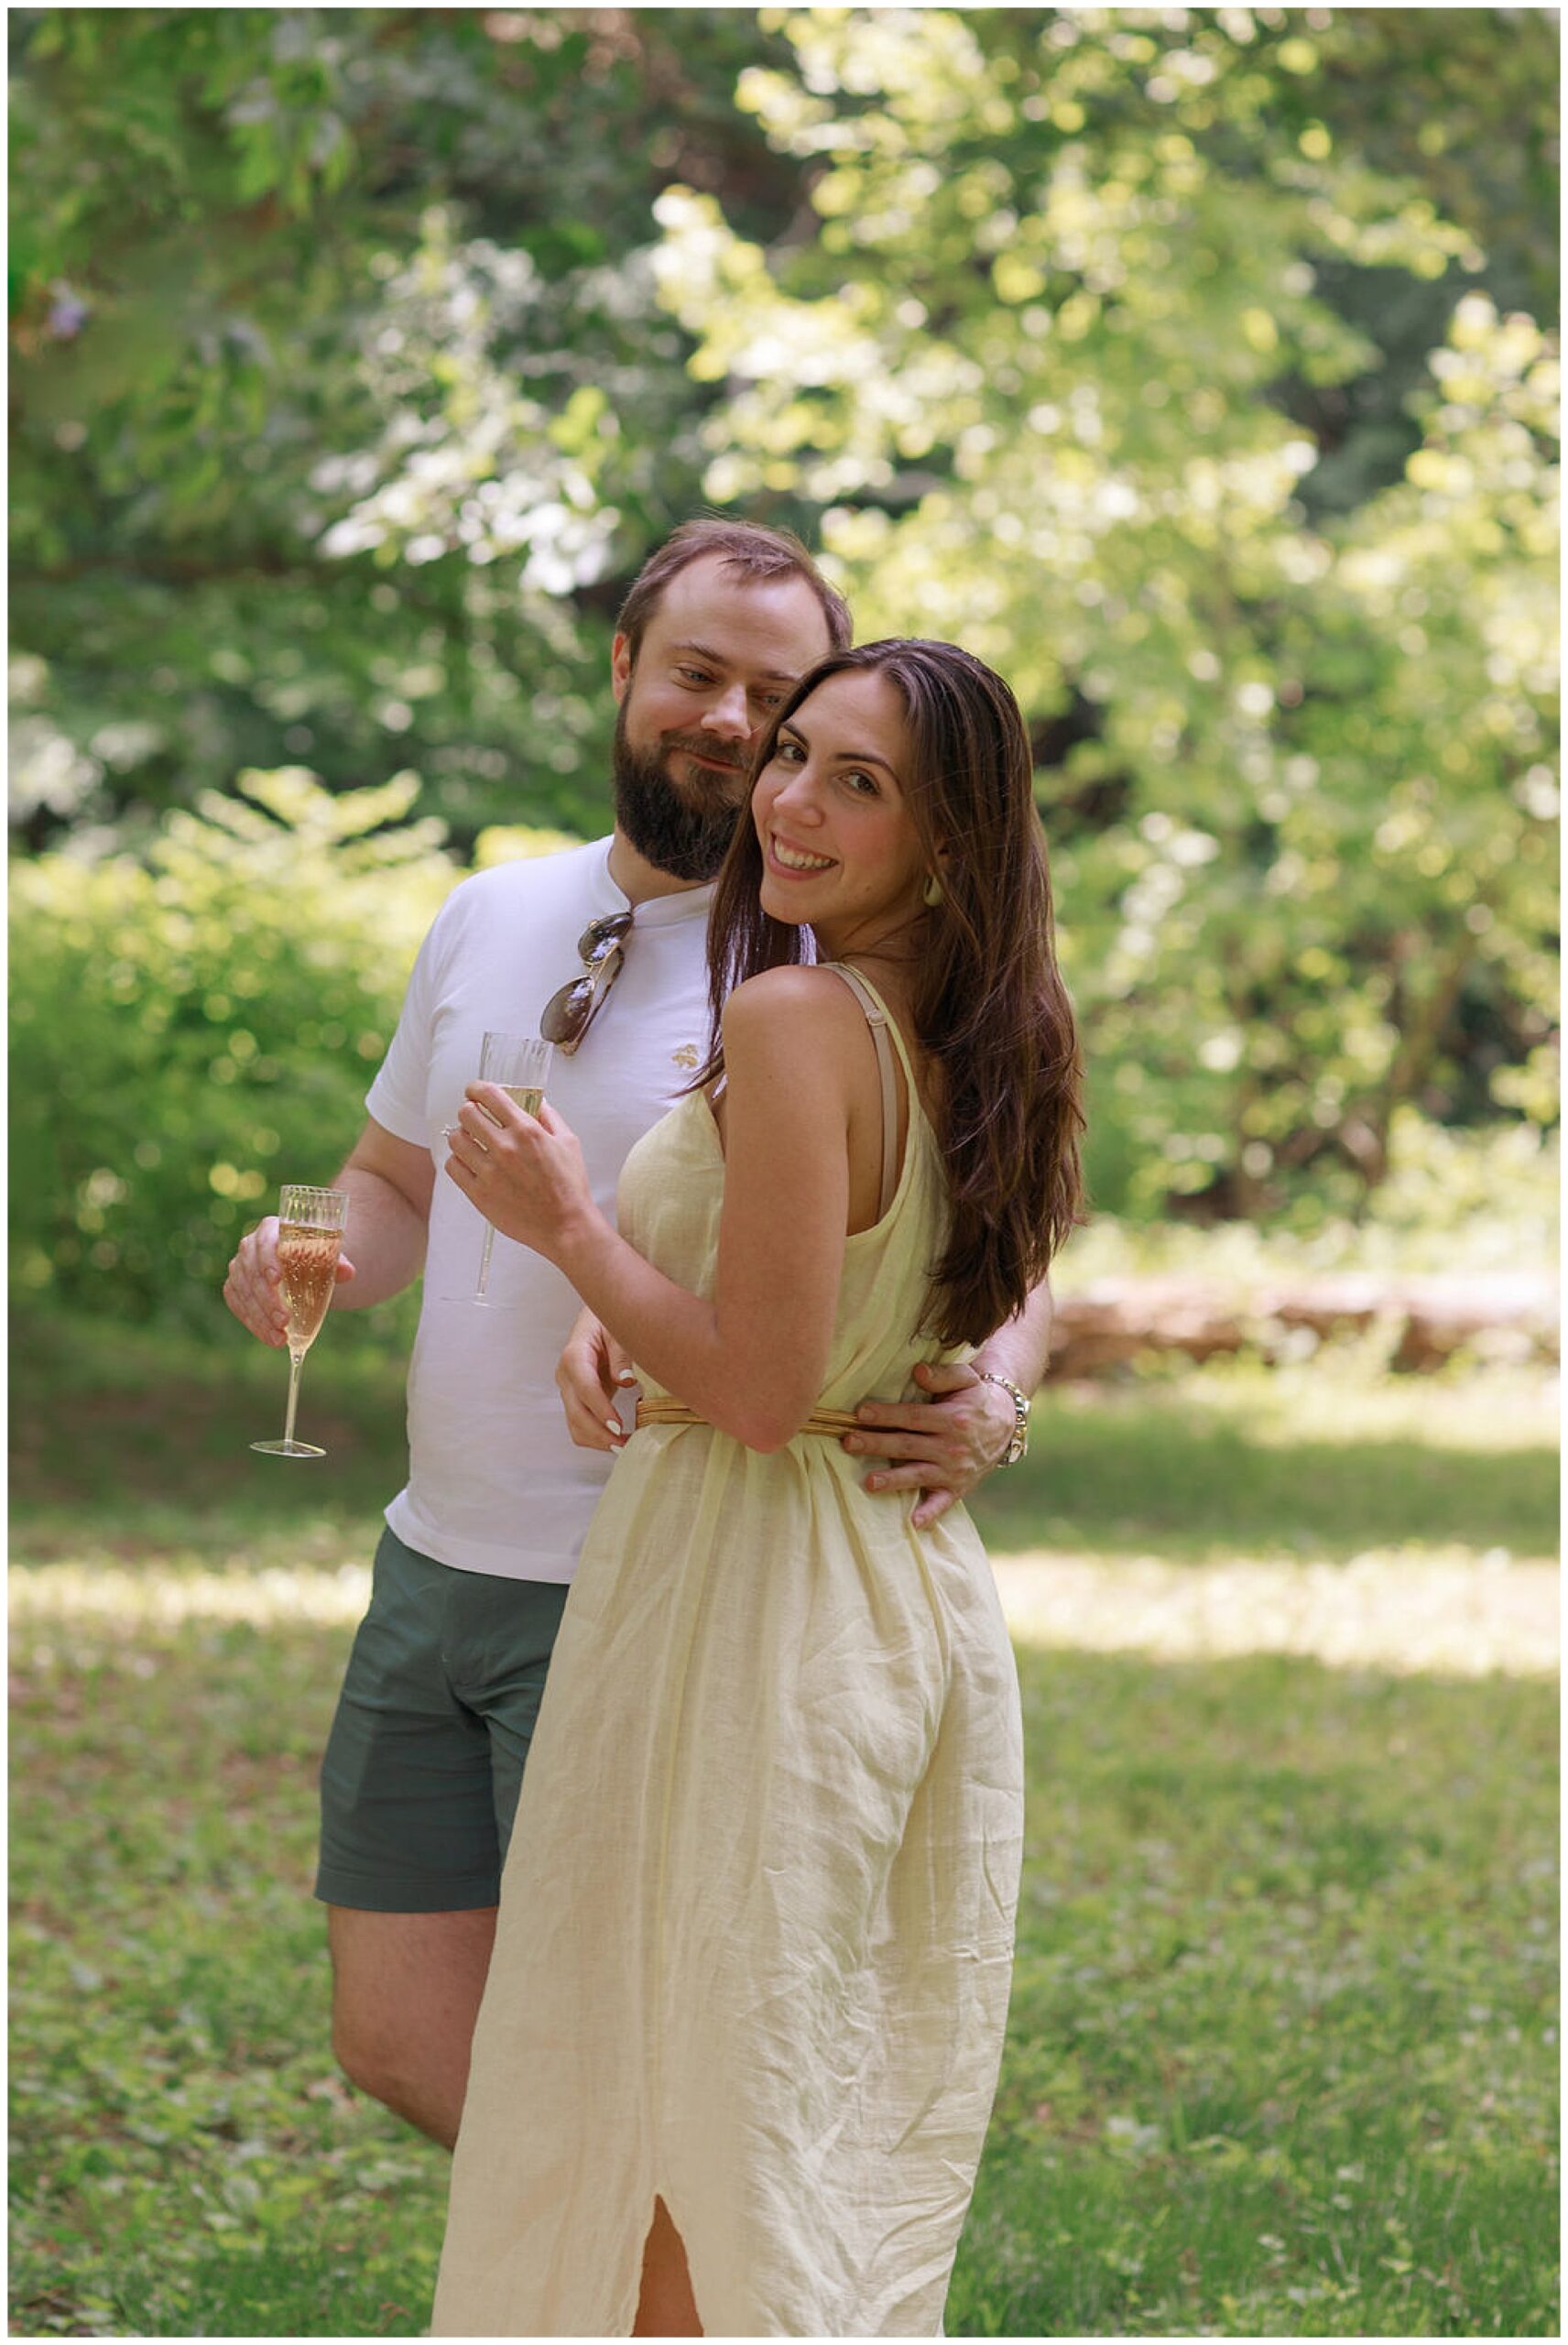 A man gazes at his fiance while drinking champagne in a park dc engagement photographer